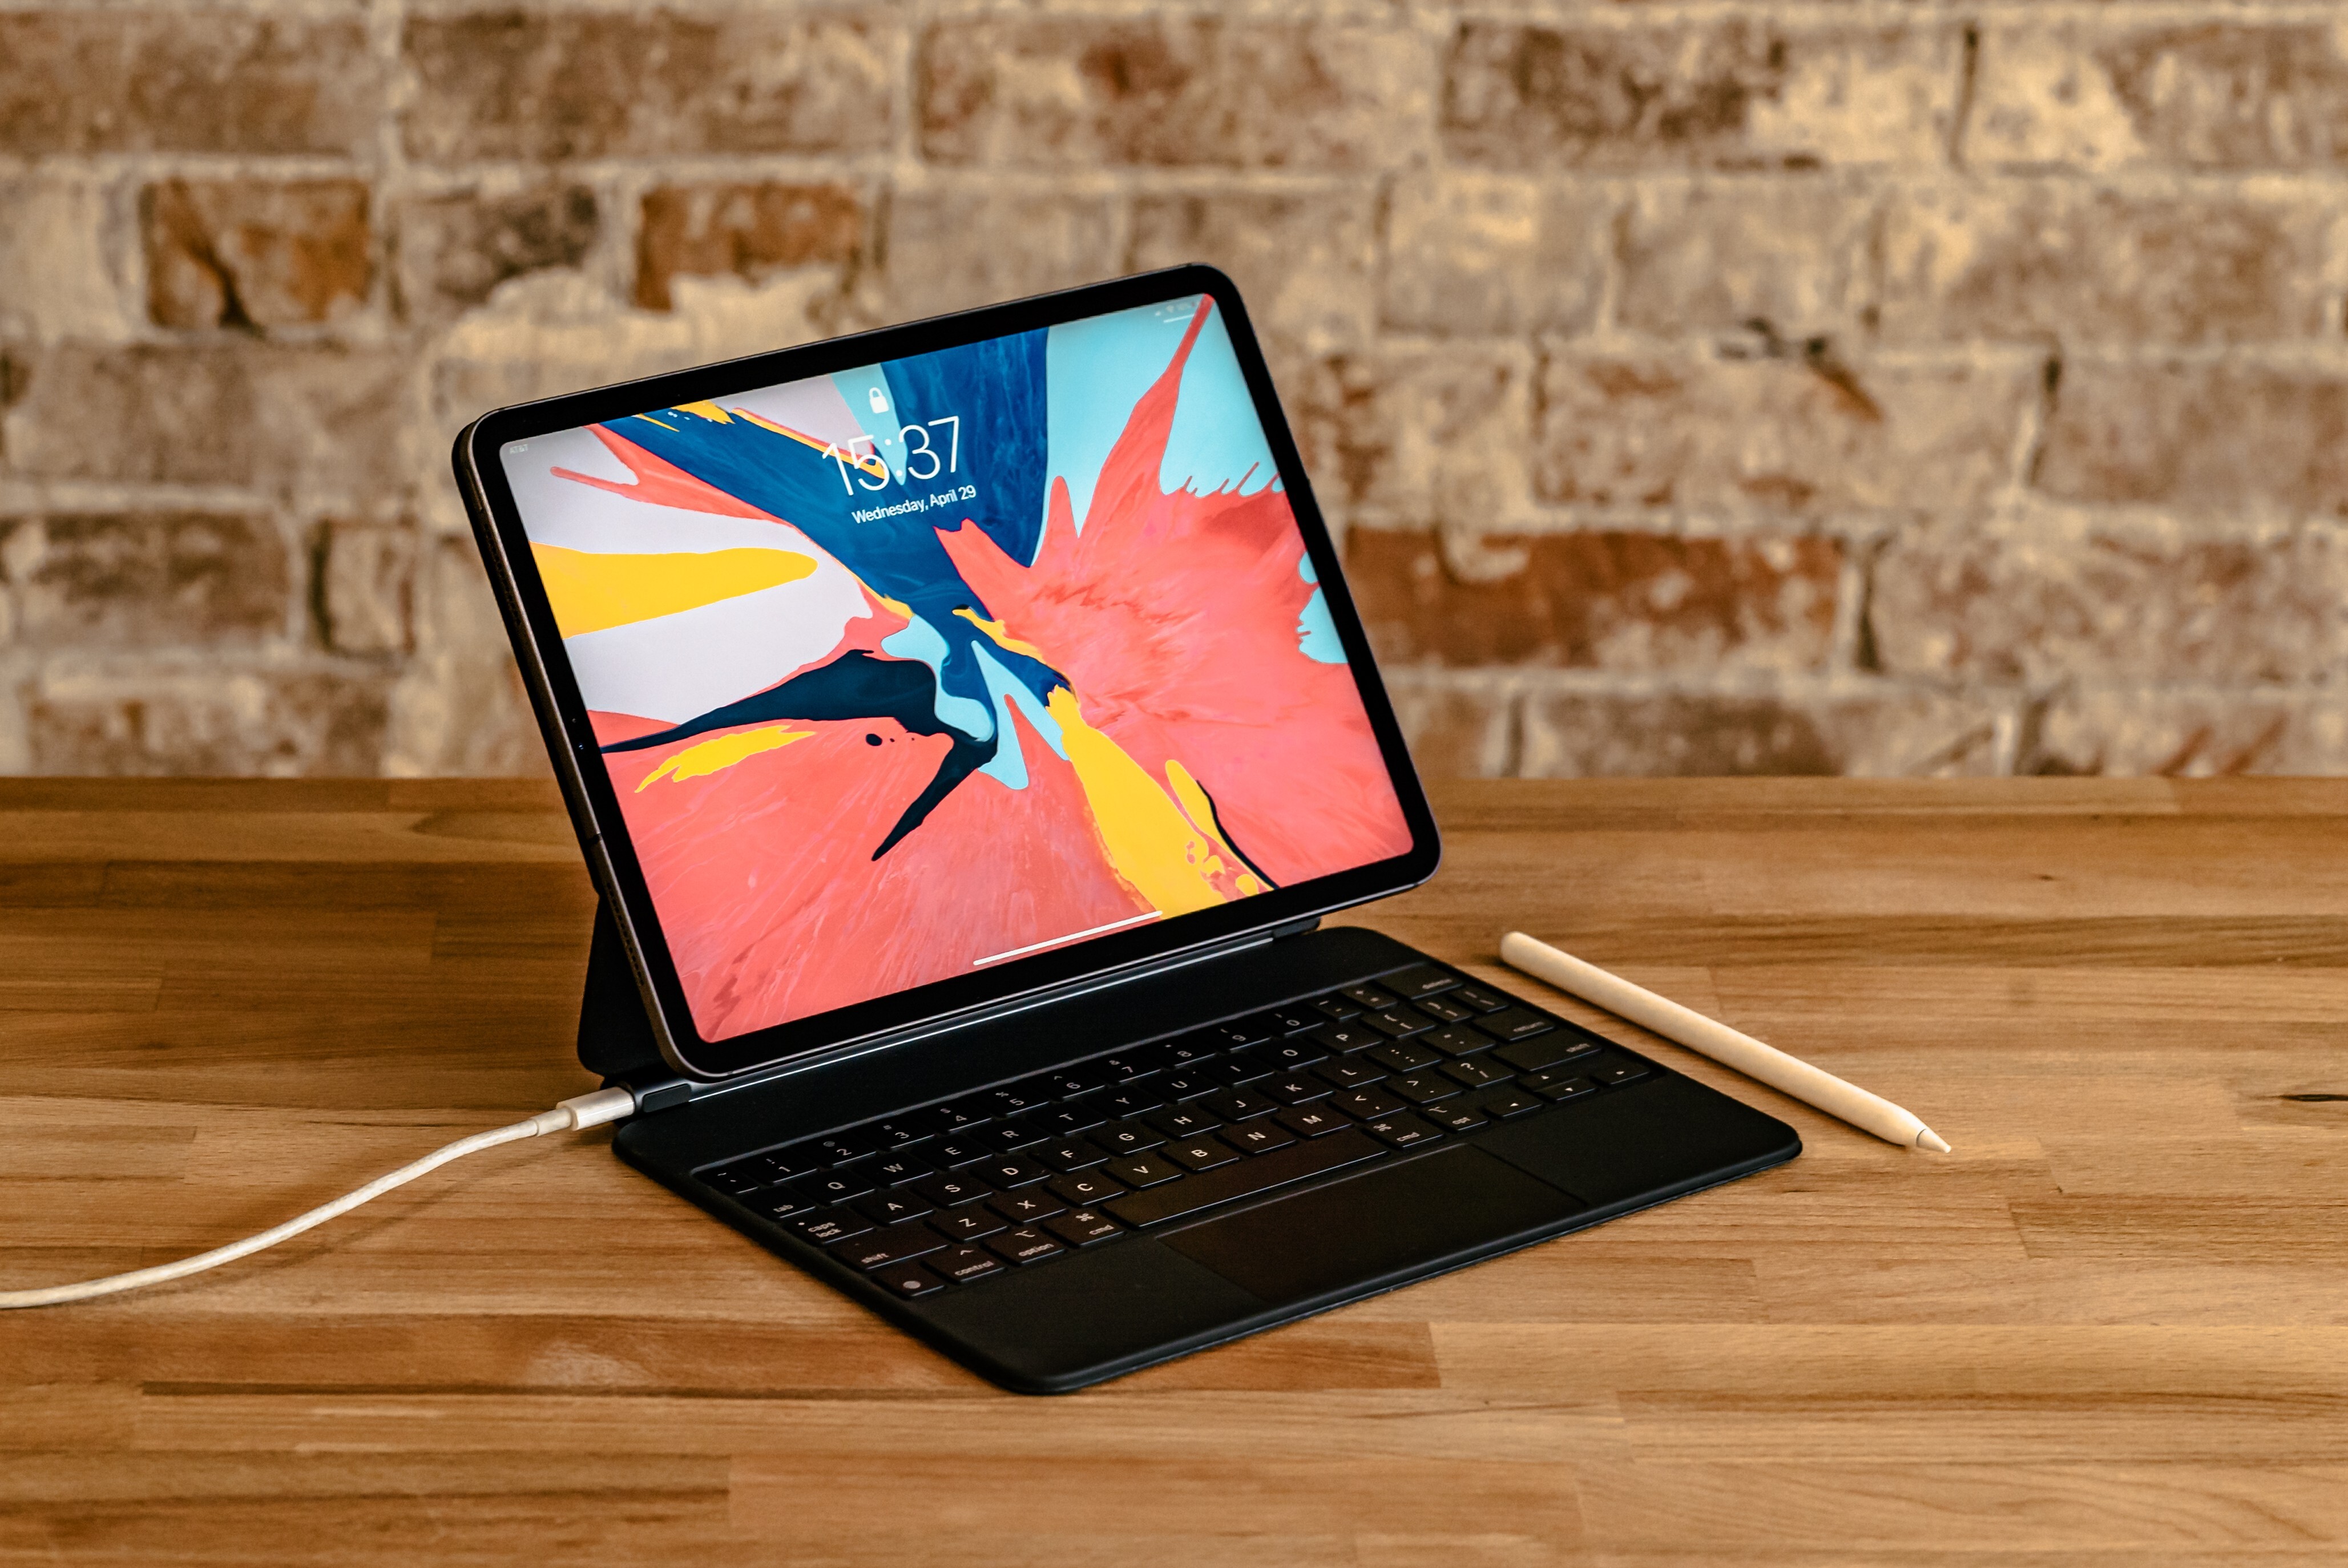 The Magic Keyboard turns the Apple iPad pro into a laptop. Photo: Shutterstock